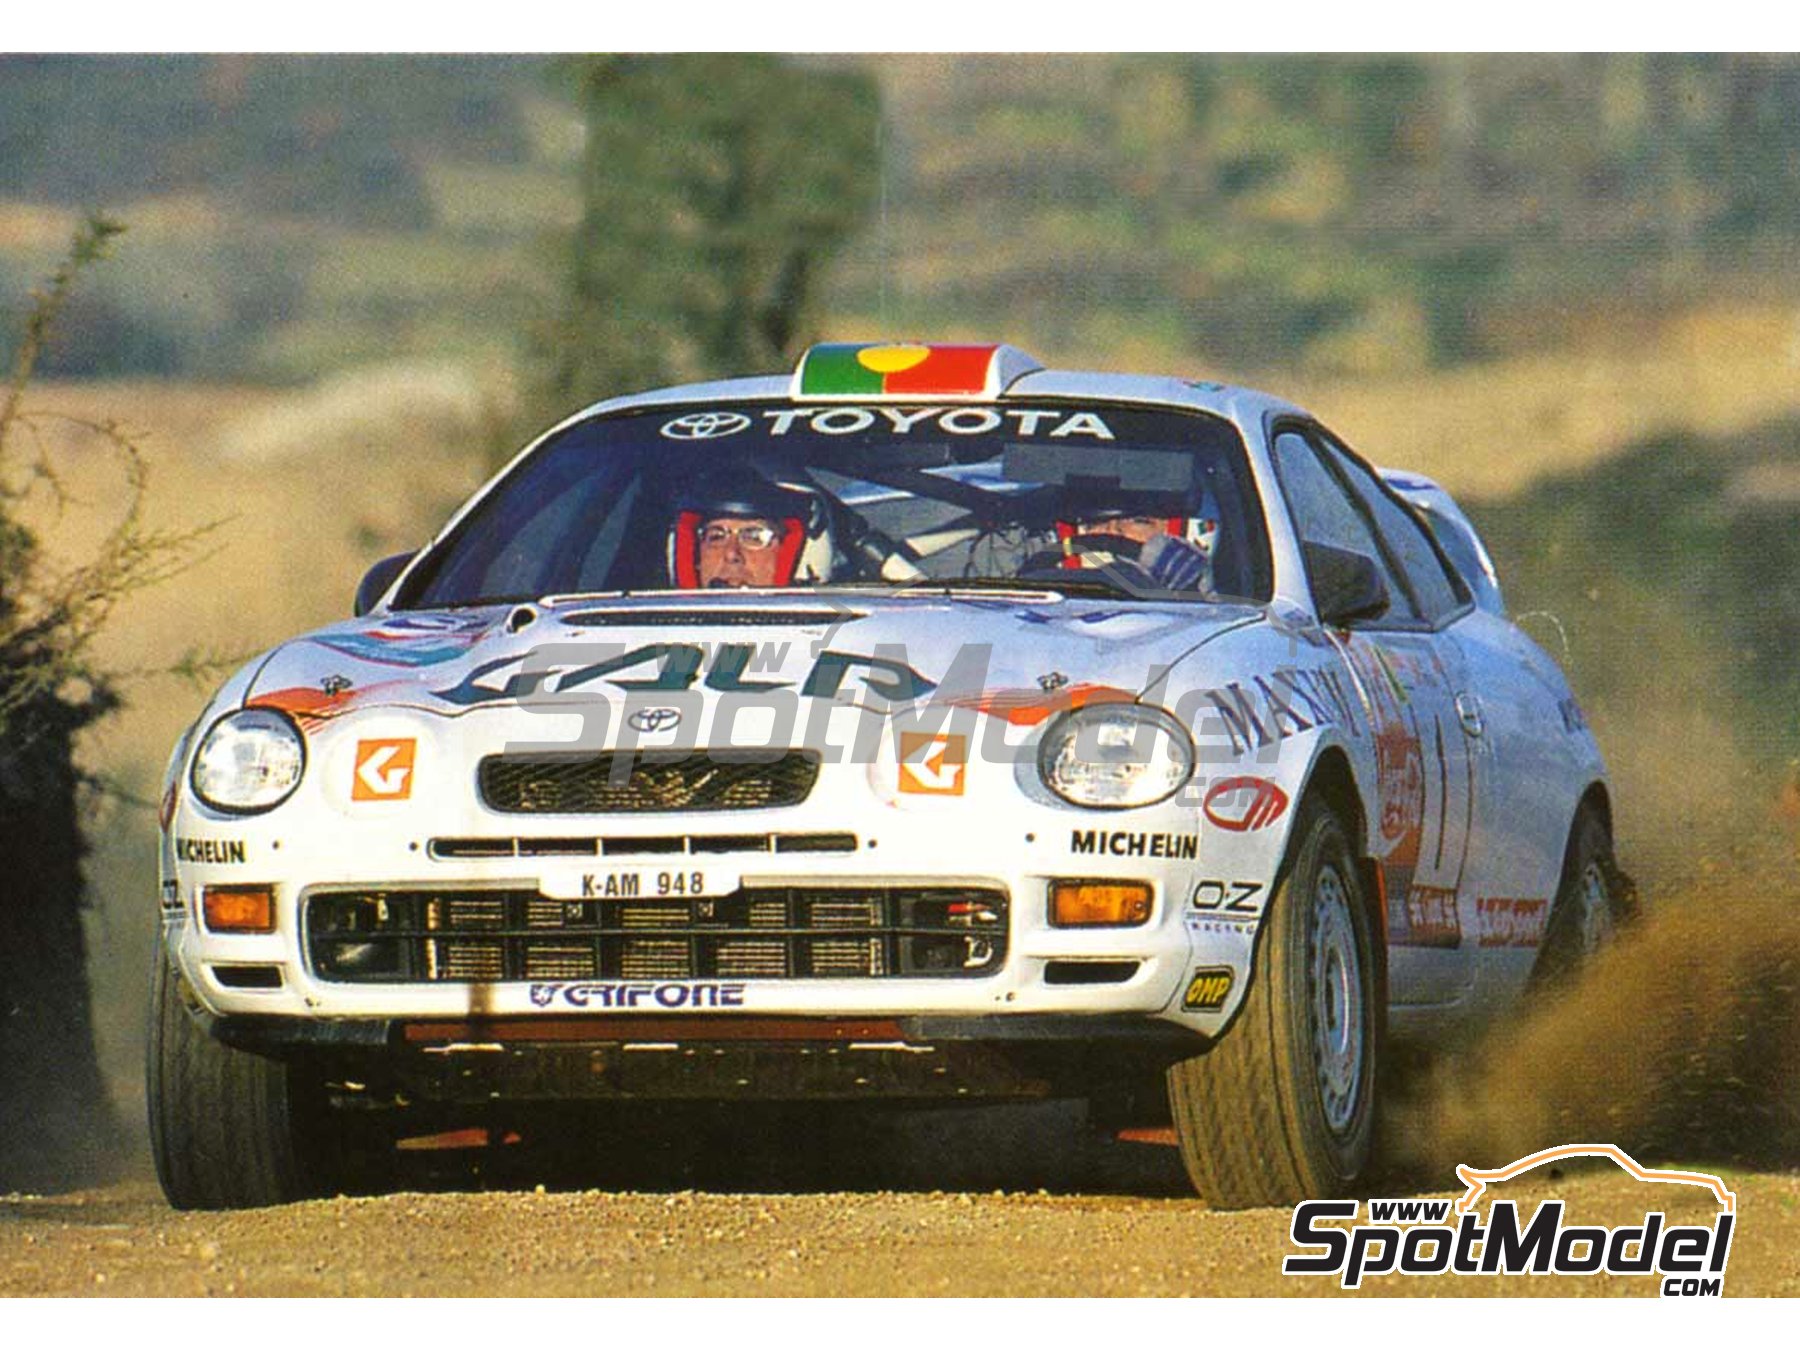 Decal 1/24 Toyota Celica GT/ST205 MARL*ORO Rally Ypres '96 #4 Loix BIG Racing43 